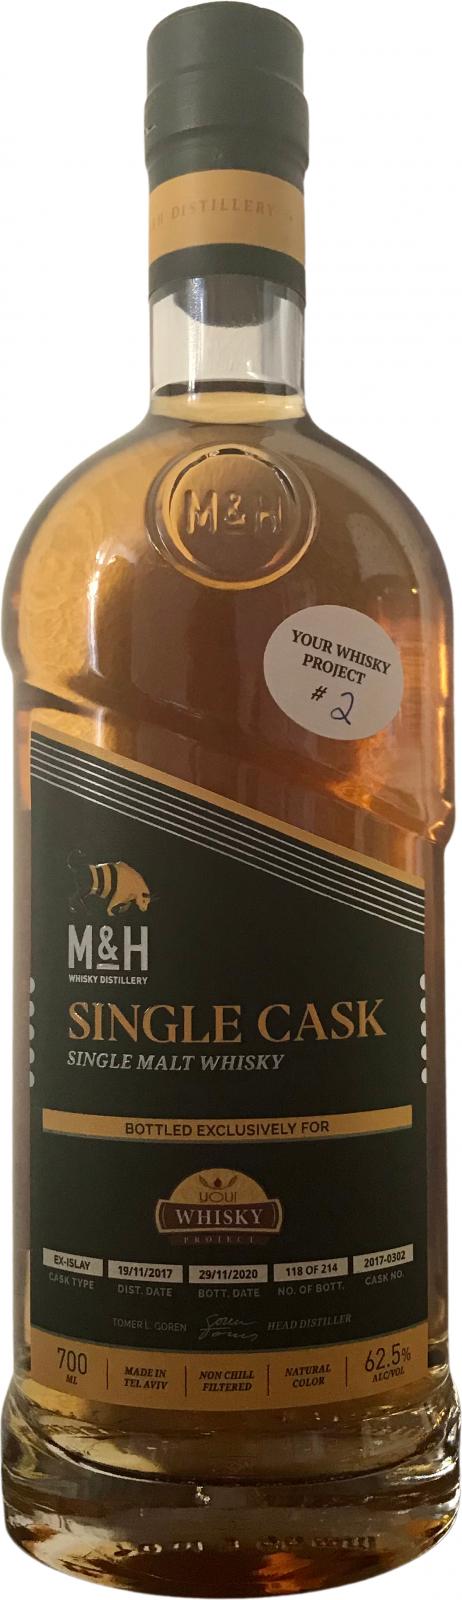 M&H 2017 Single Cask Your Whisky Project #2 Ex-Islay 2017-0302 62.5% 700ml